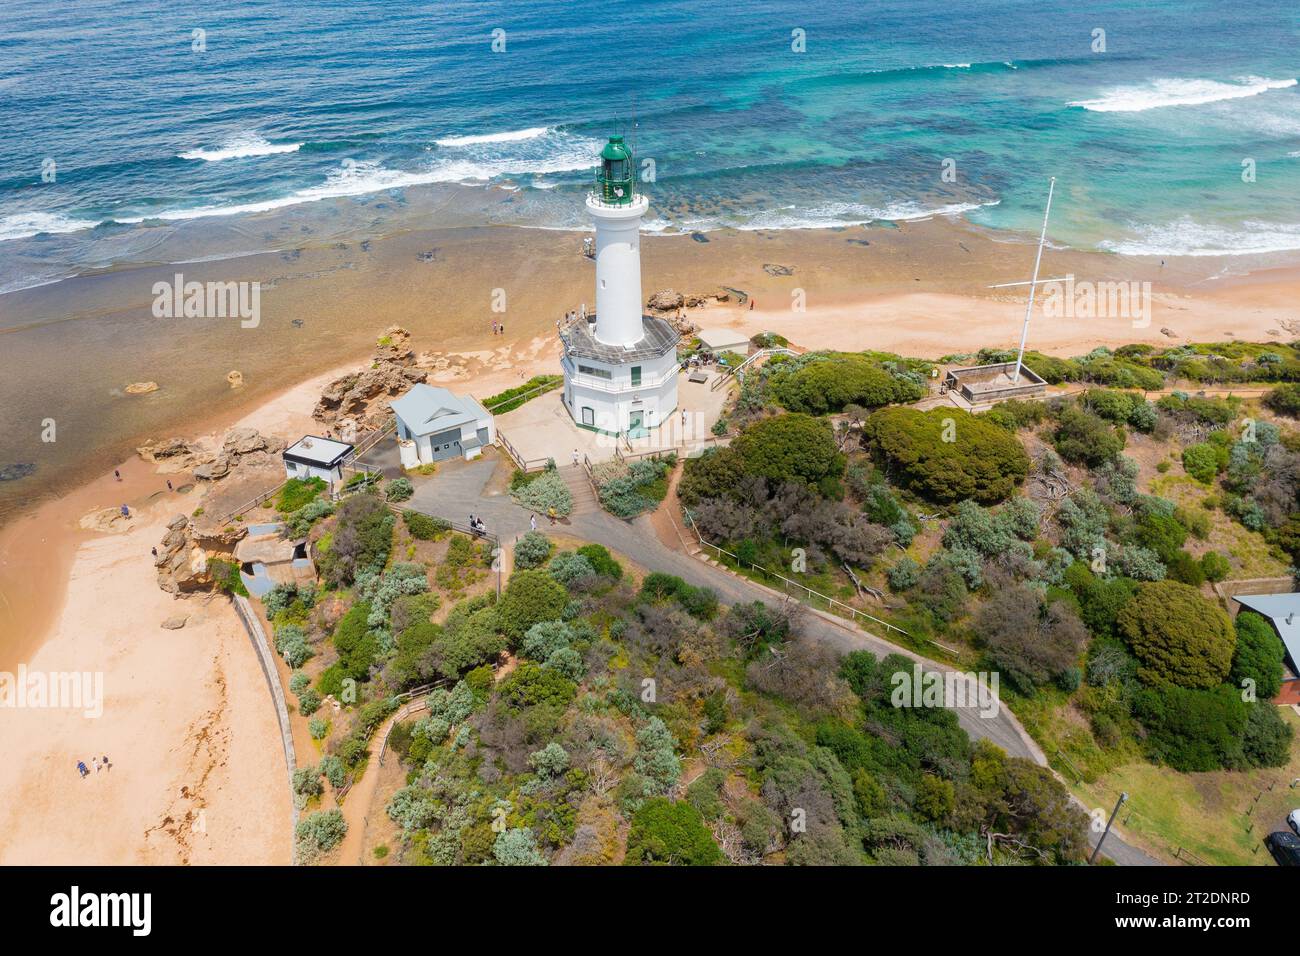 Aerial view of a tall white lighthouse on a cliff top surrounded by sandy beaches at Point Lonsdale on the Bellarine Peninsula in Victoria, Australia Stock Photo